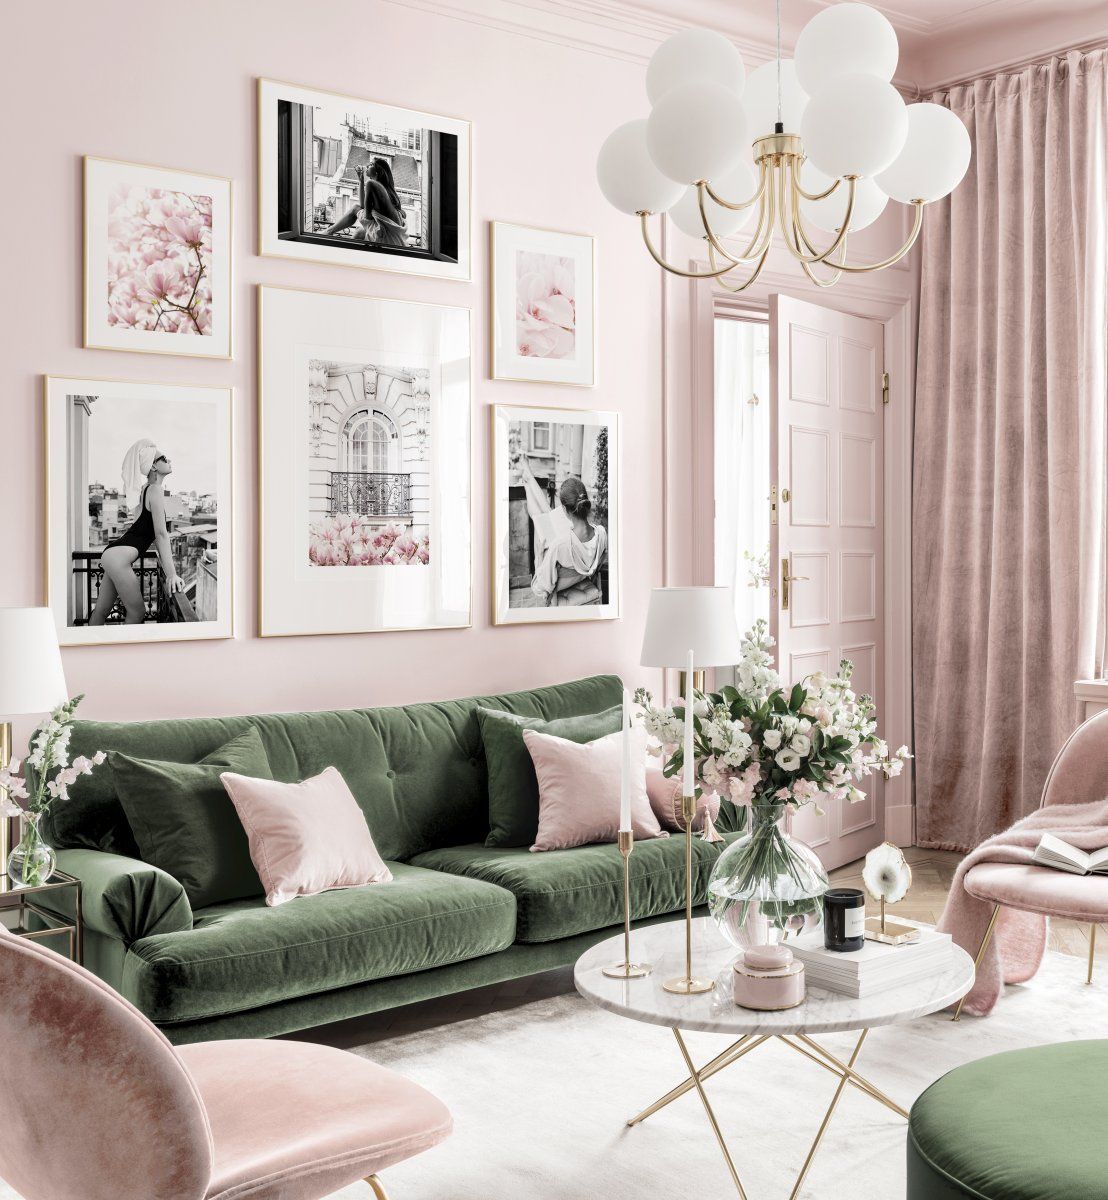 Pink and Monochrome Style